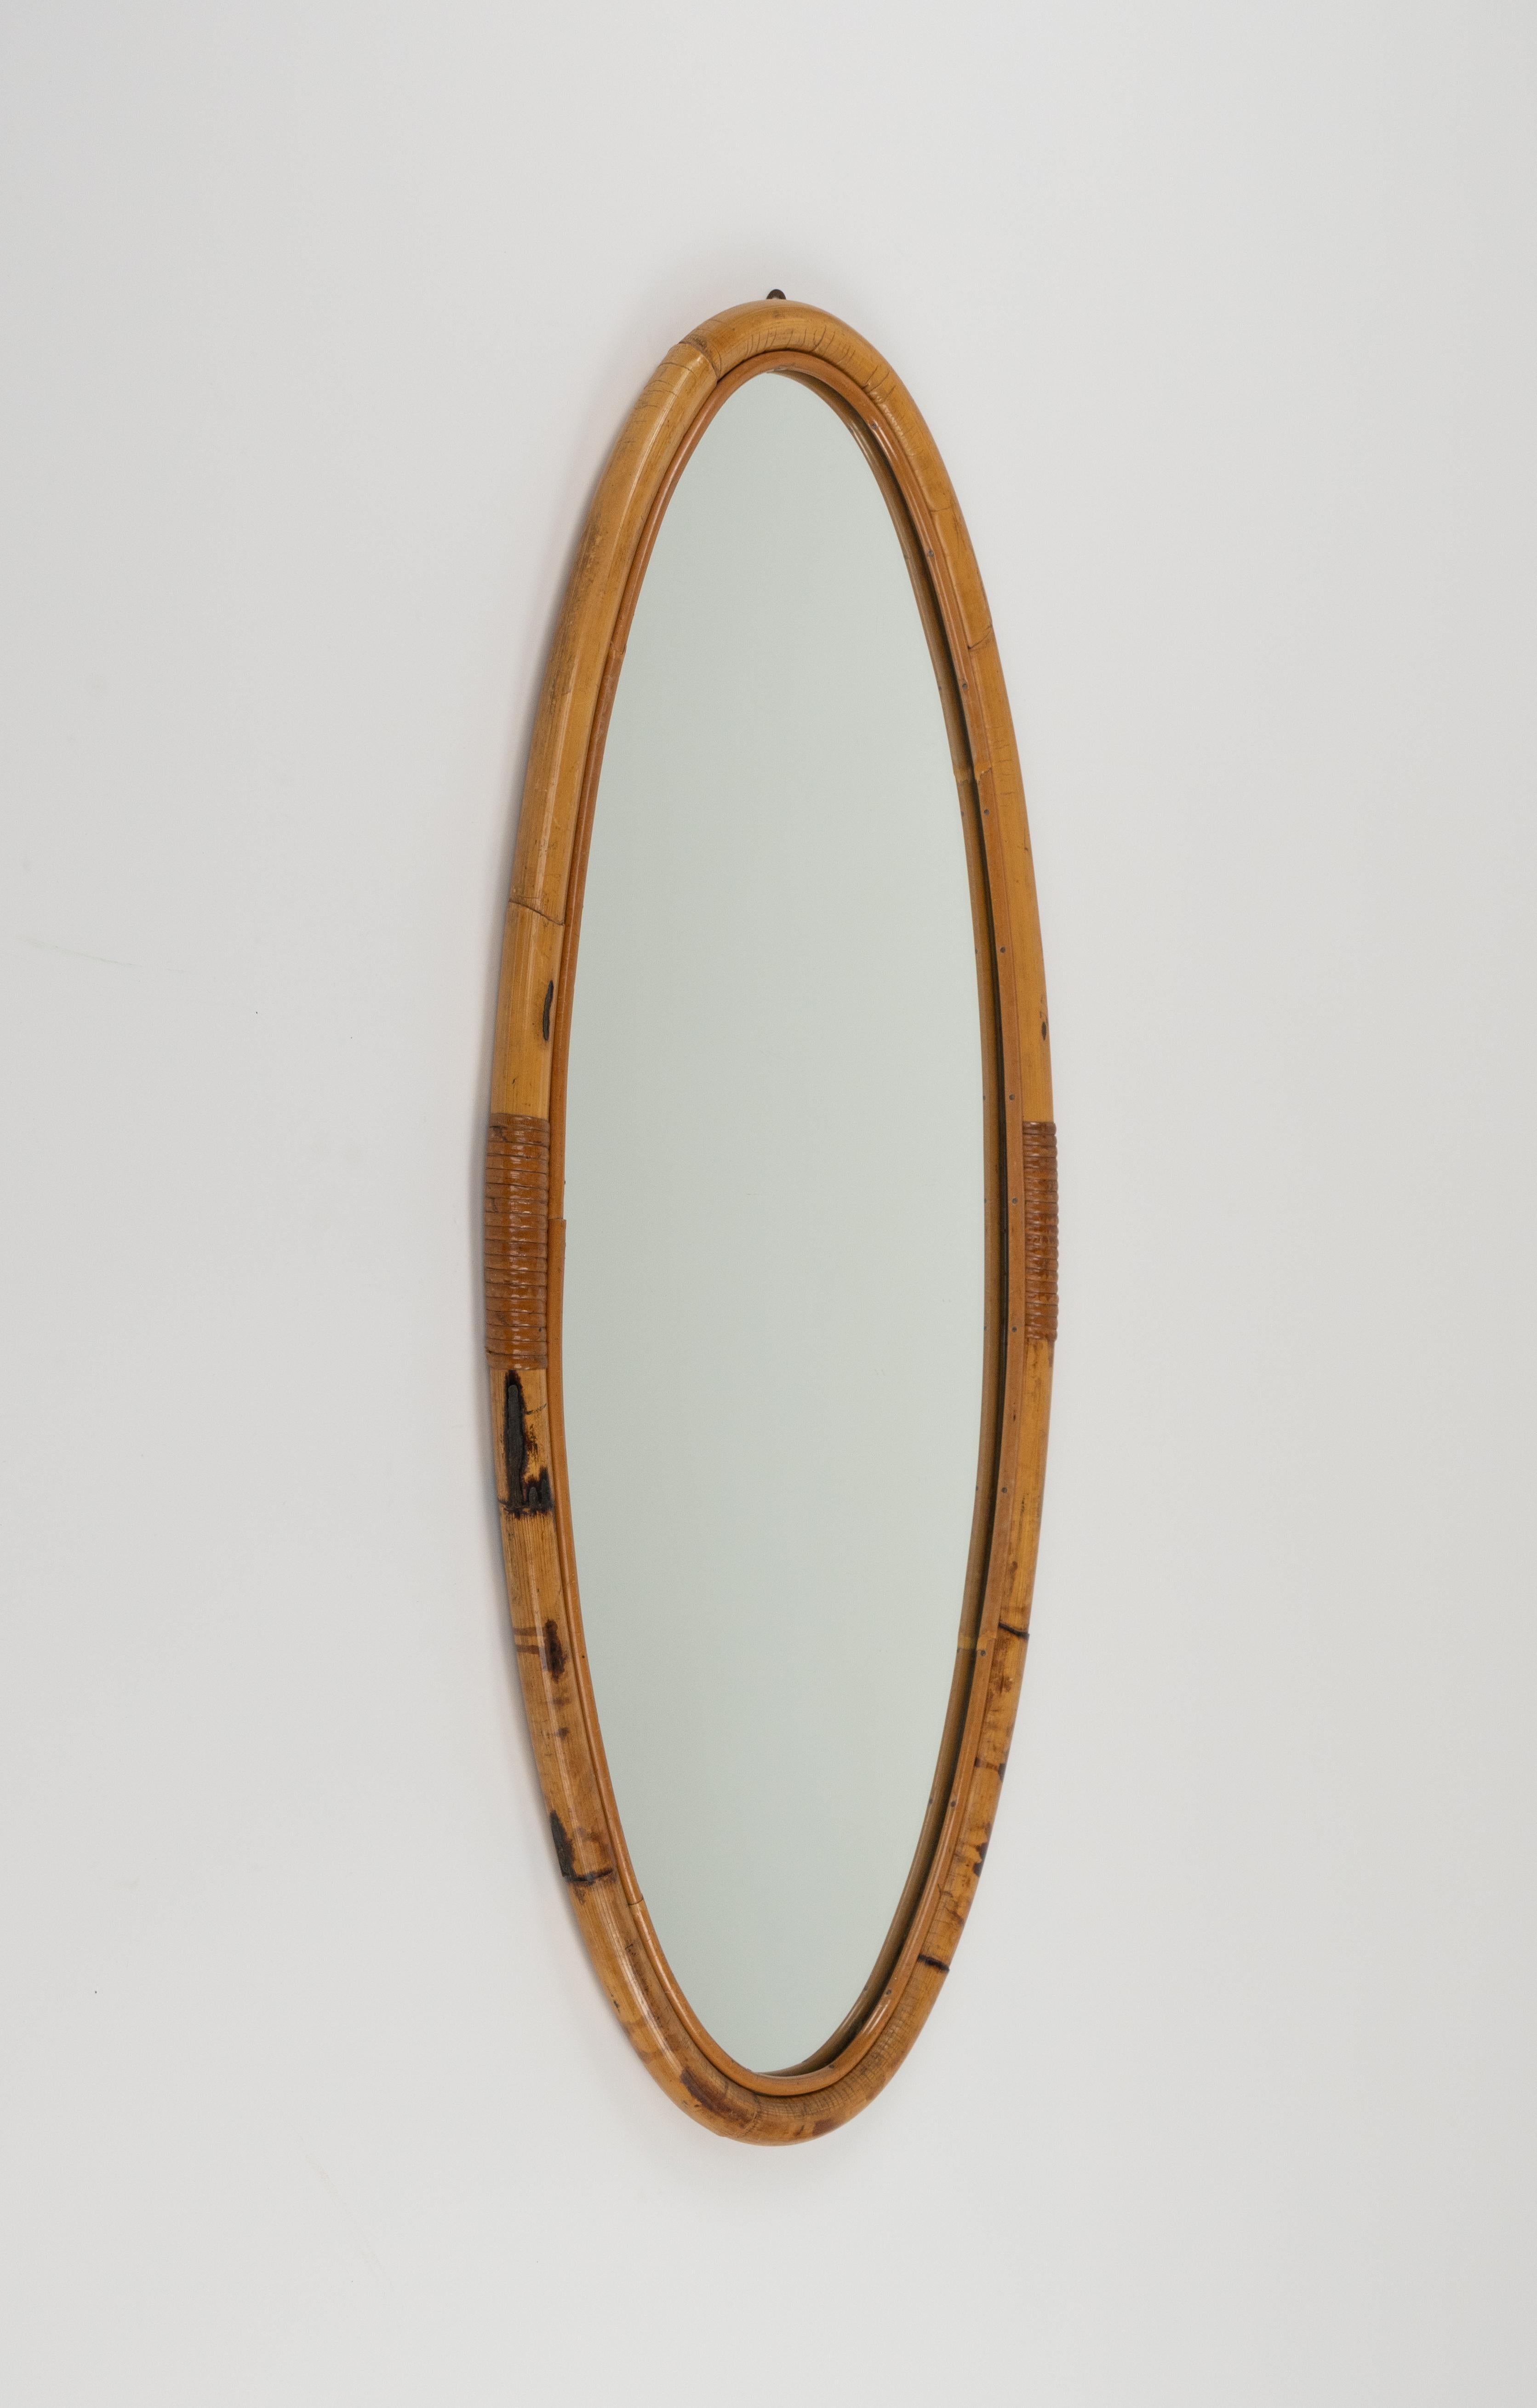 Midcentury Bamboo and Rattan Oval Wall Mirror, Italy 1970s For Sale 7